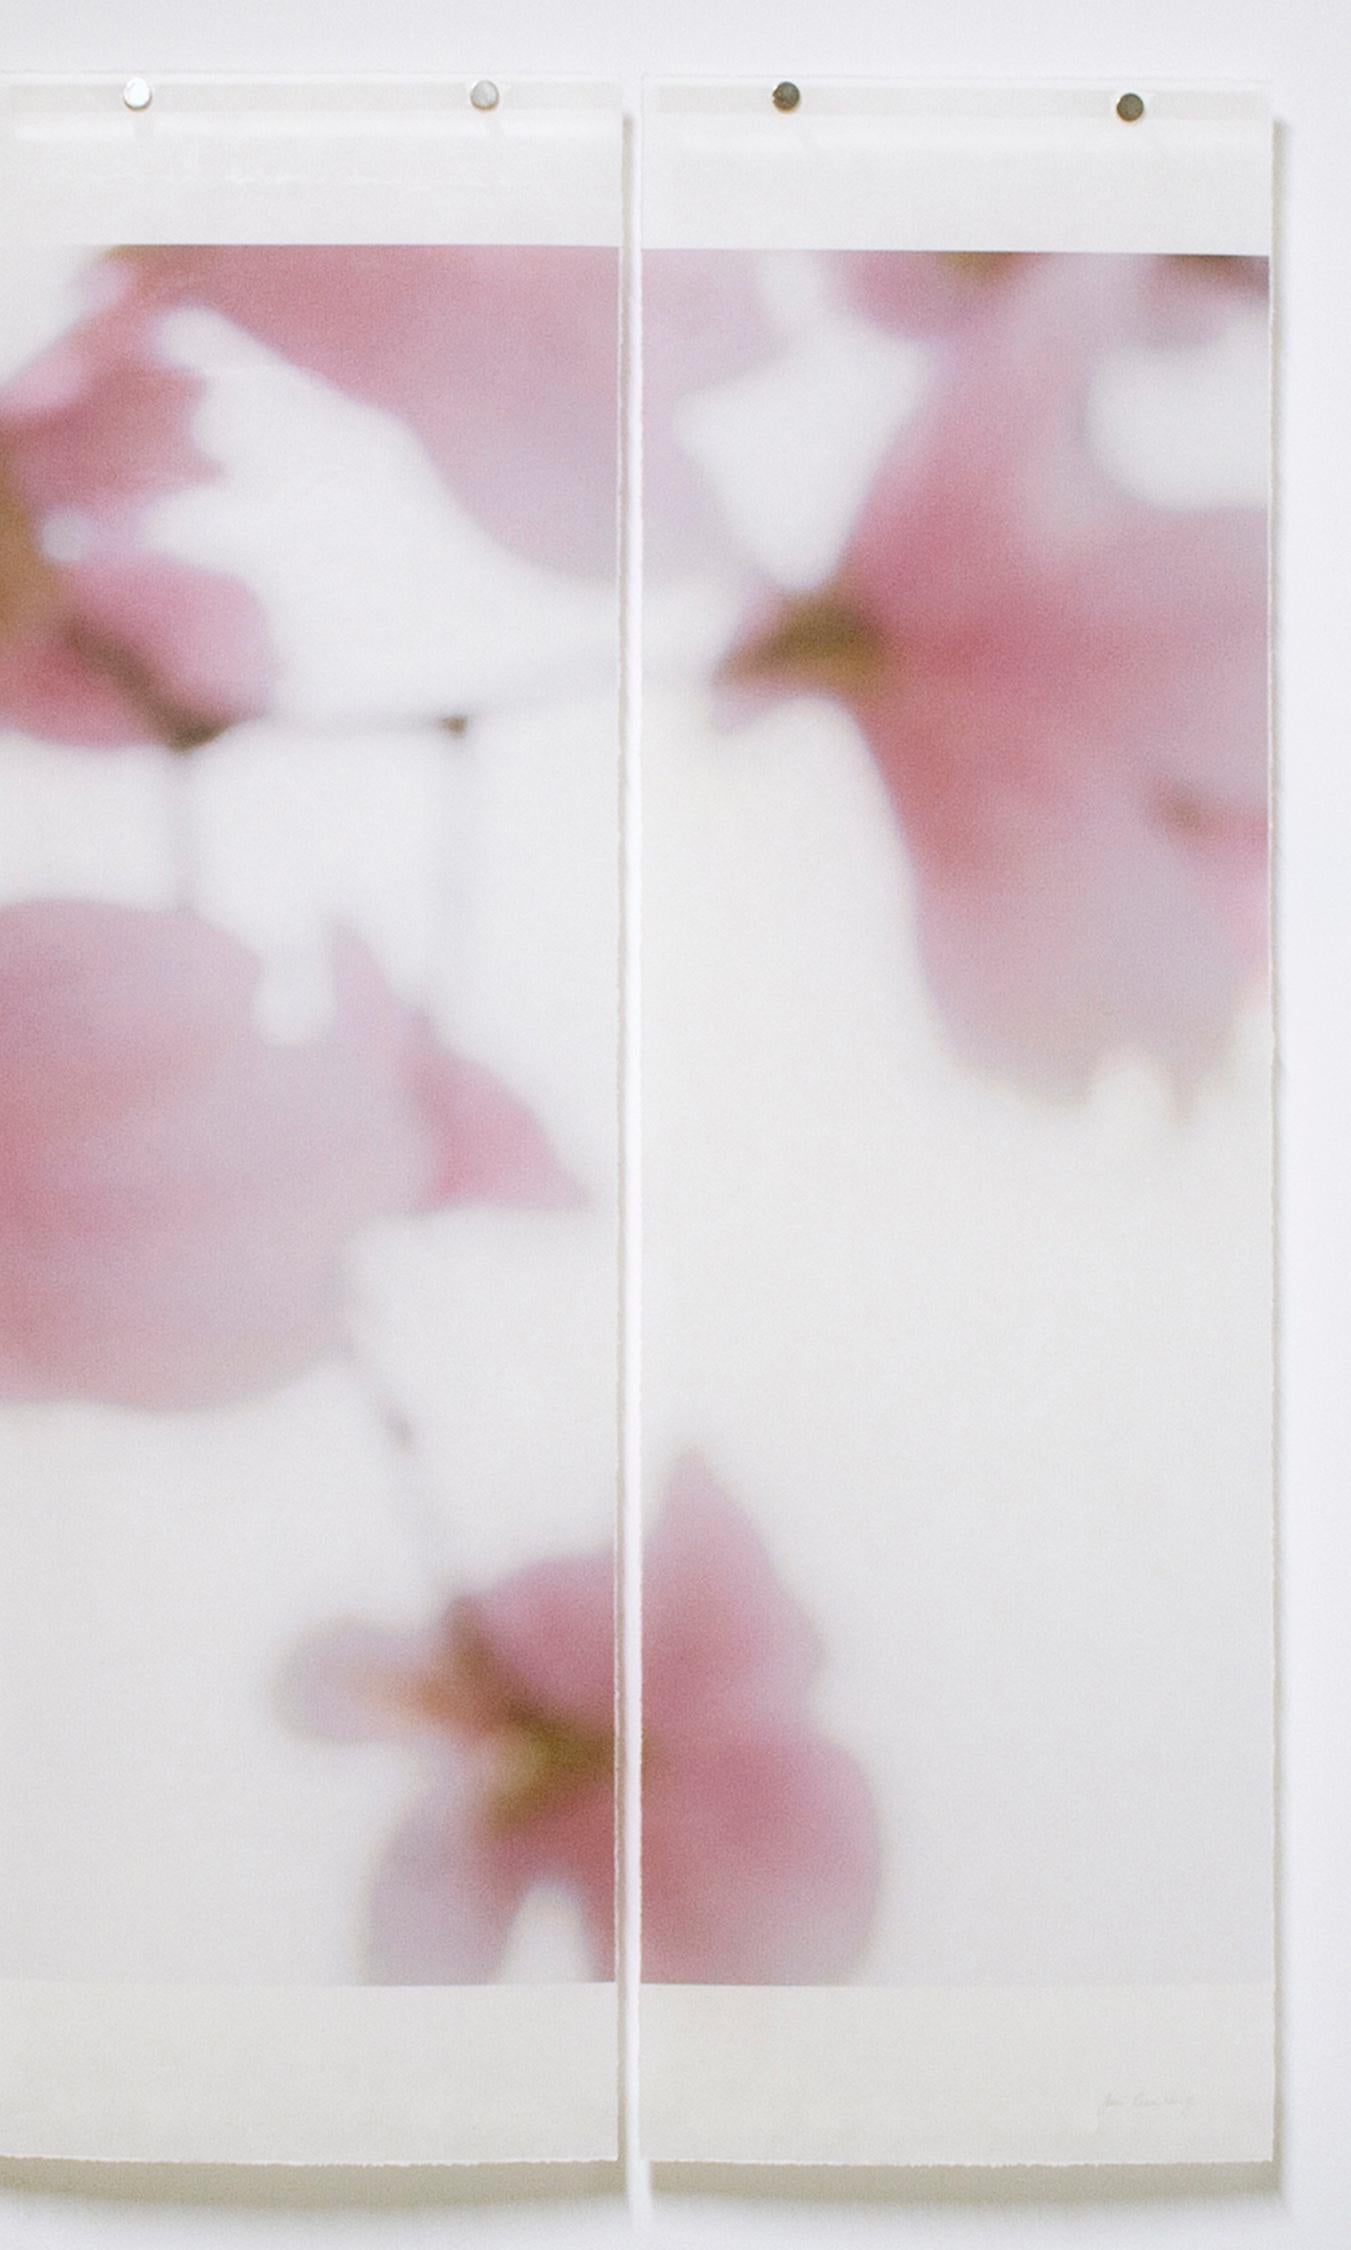 Jeri Eisenberg creates nature inspired works in single panels, diptychs and triptychs. Her soft colored photographic pieces are created using non-traditional and alternative photo-based techniques. Her beautiful work evokes memories and visceral